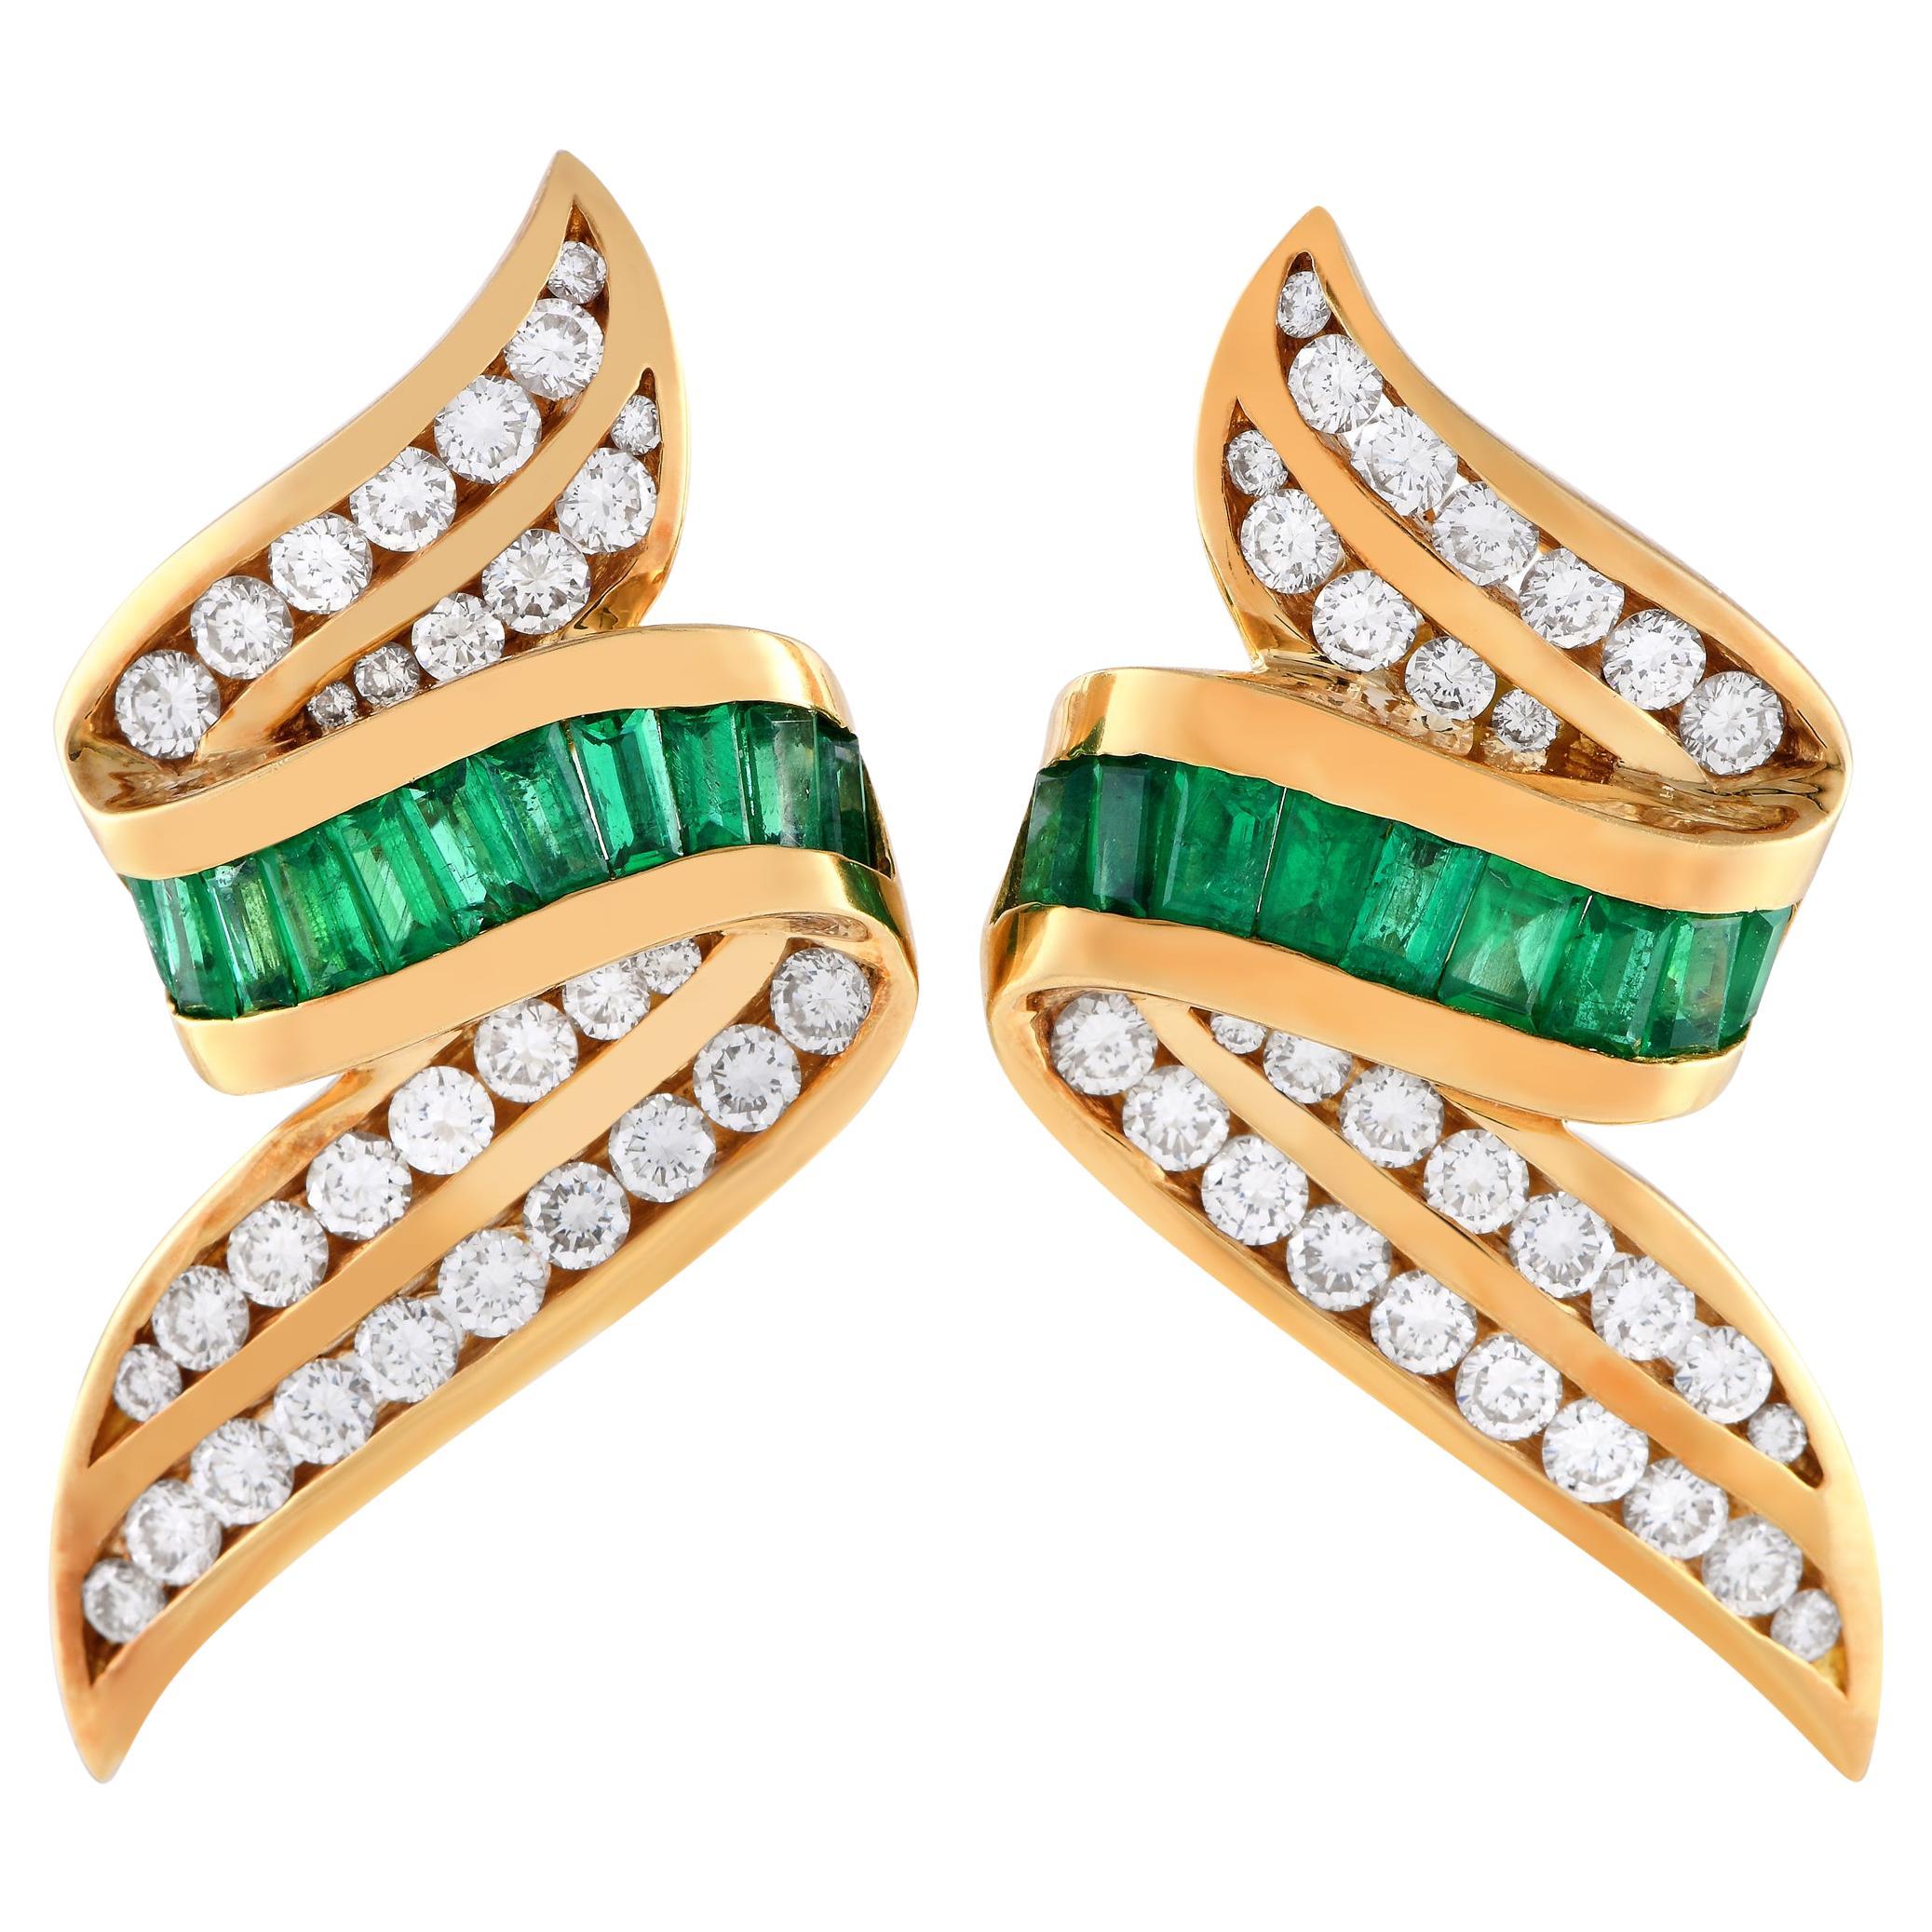 Charles Krypell 18k Yellow Gold 2.50 Carat Diamond and Emerald Earrings